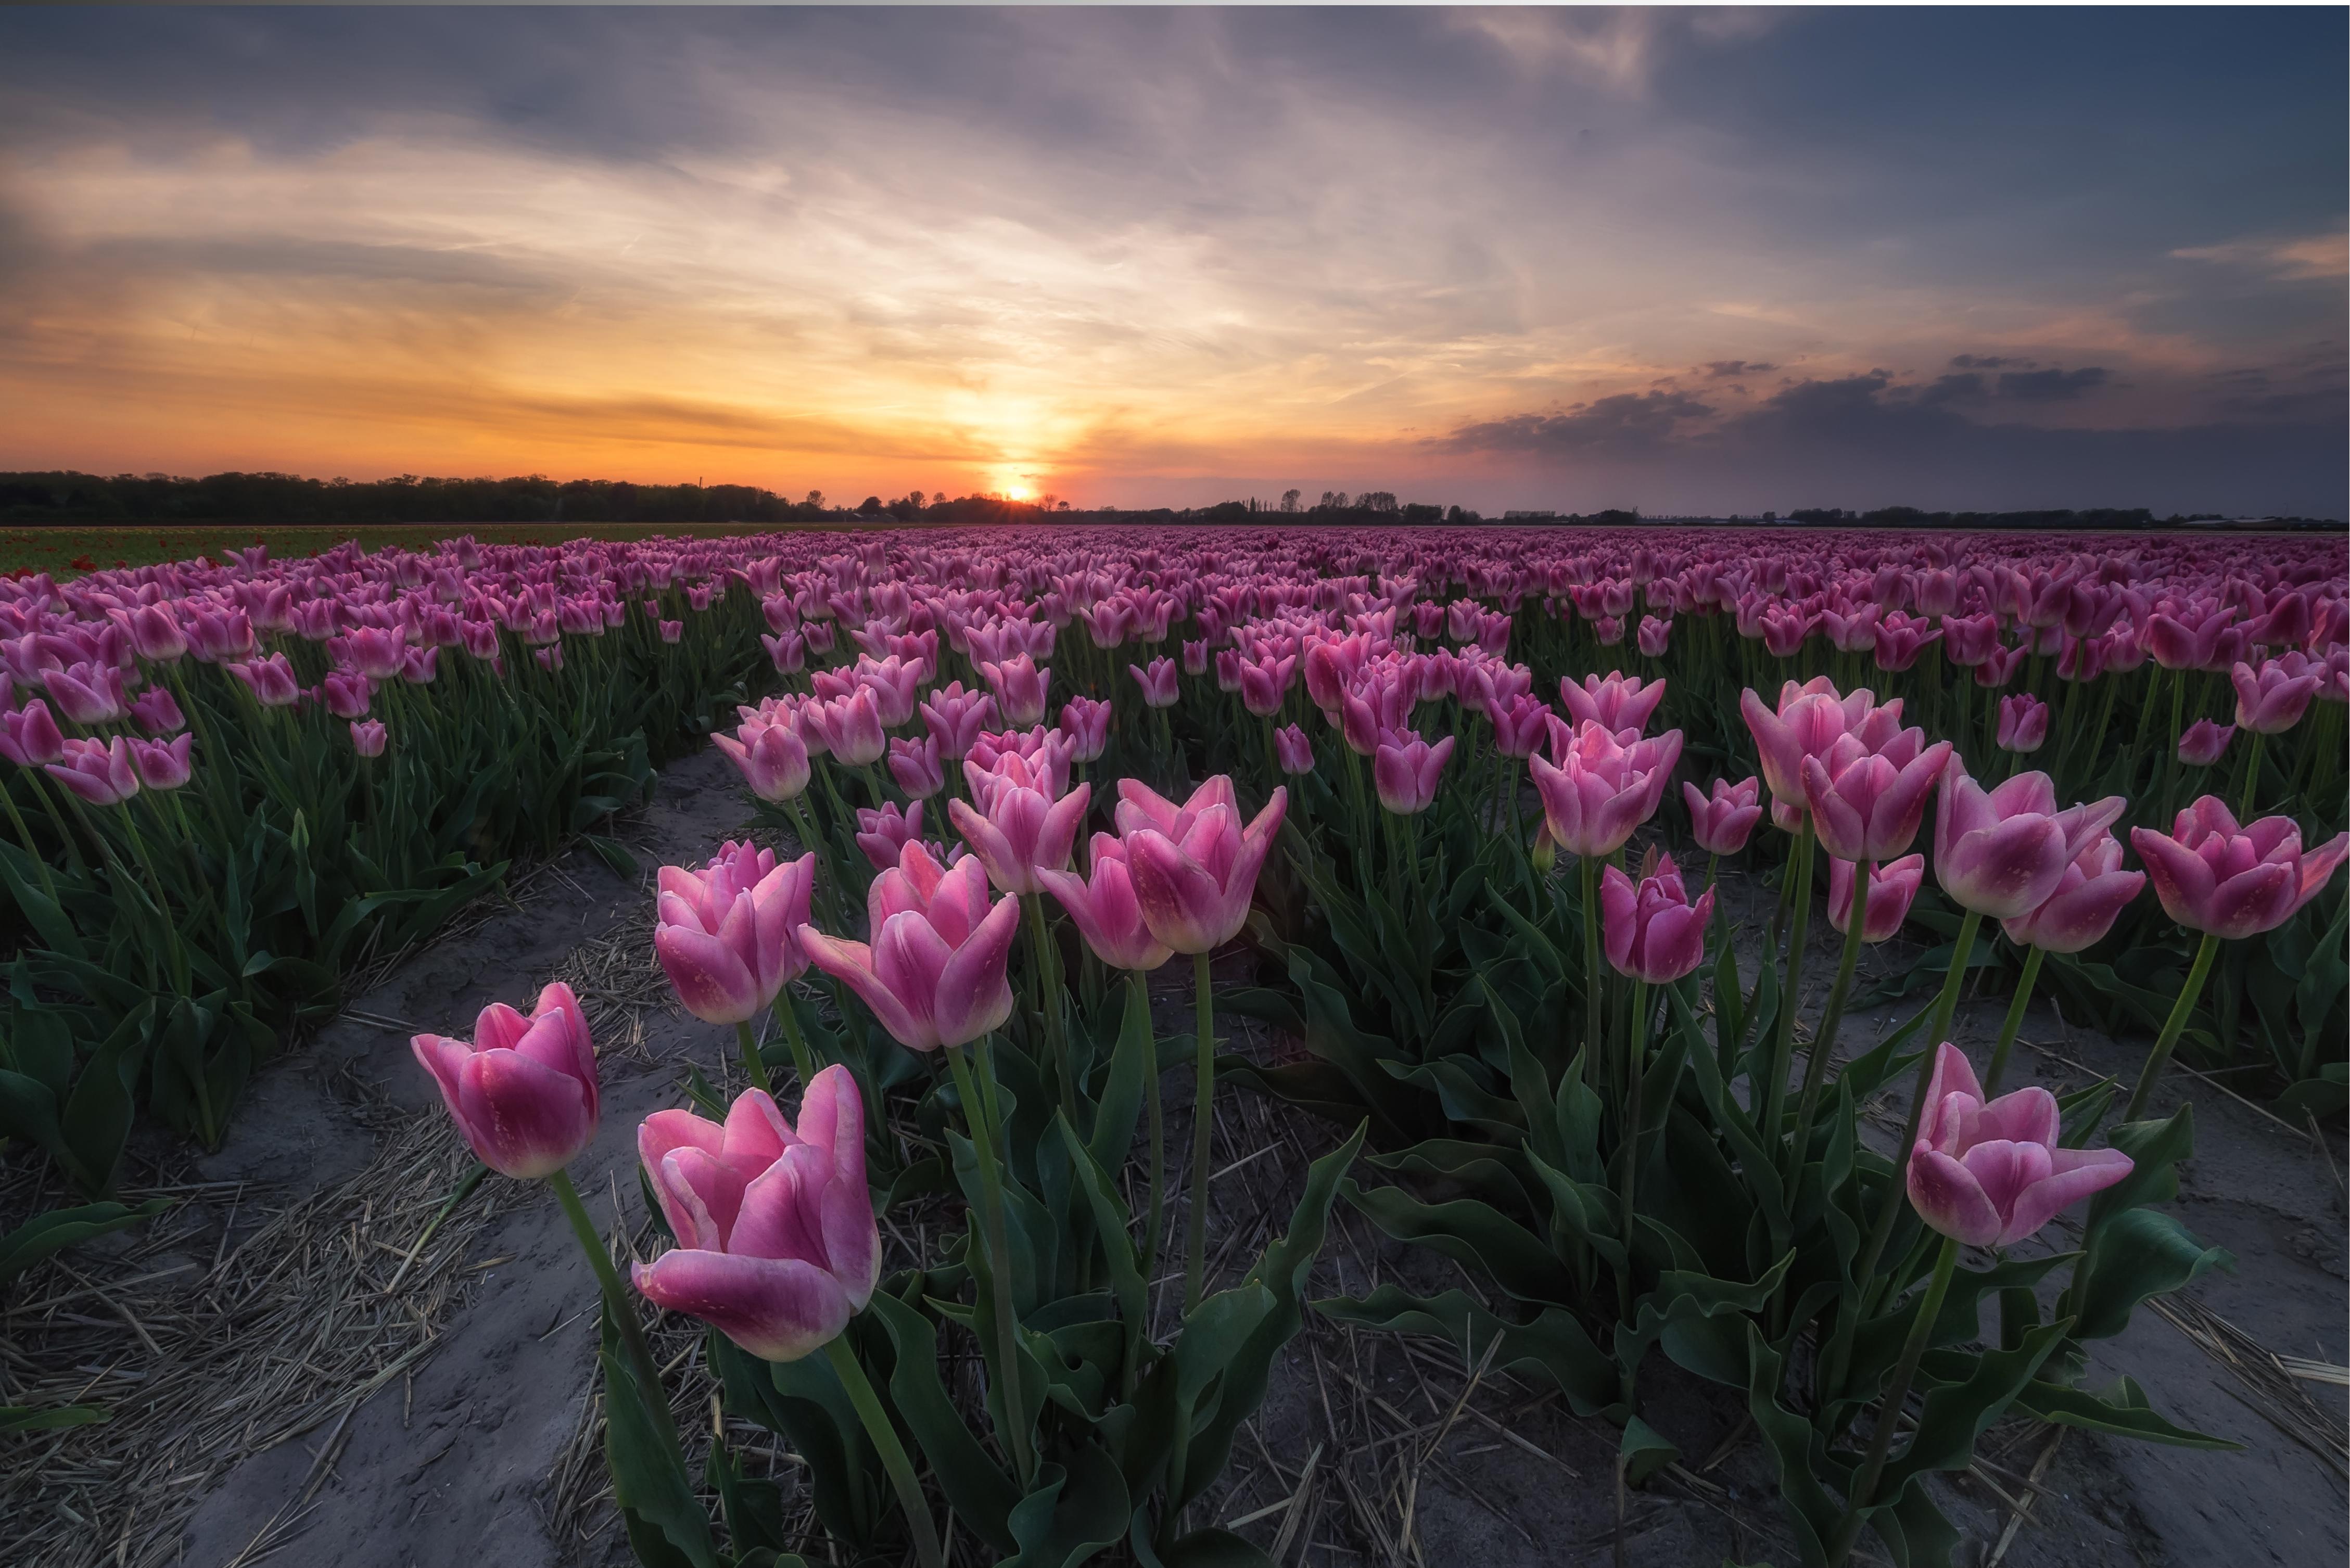 Wallpapers Tulips in the Netherlands field sunset on the desktop